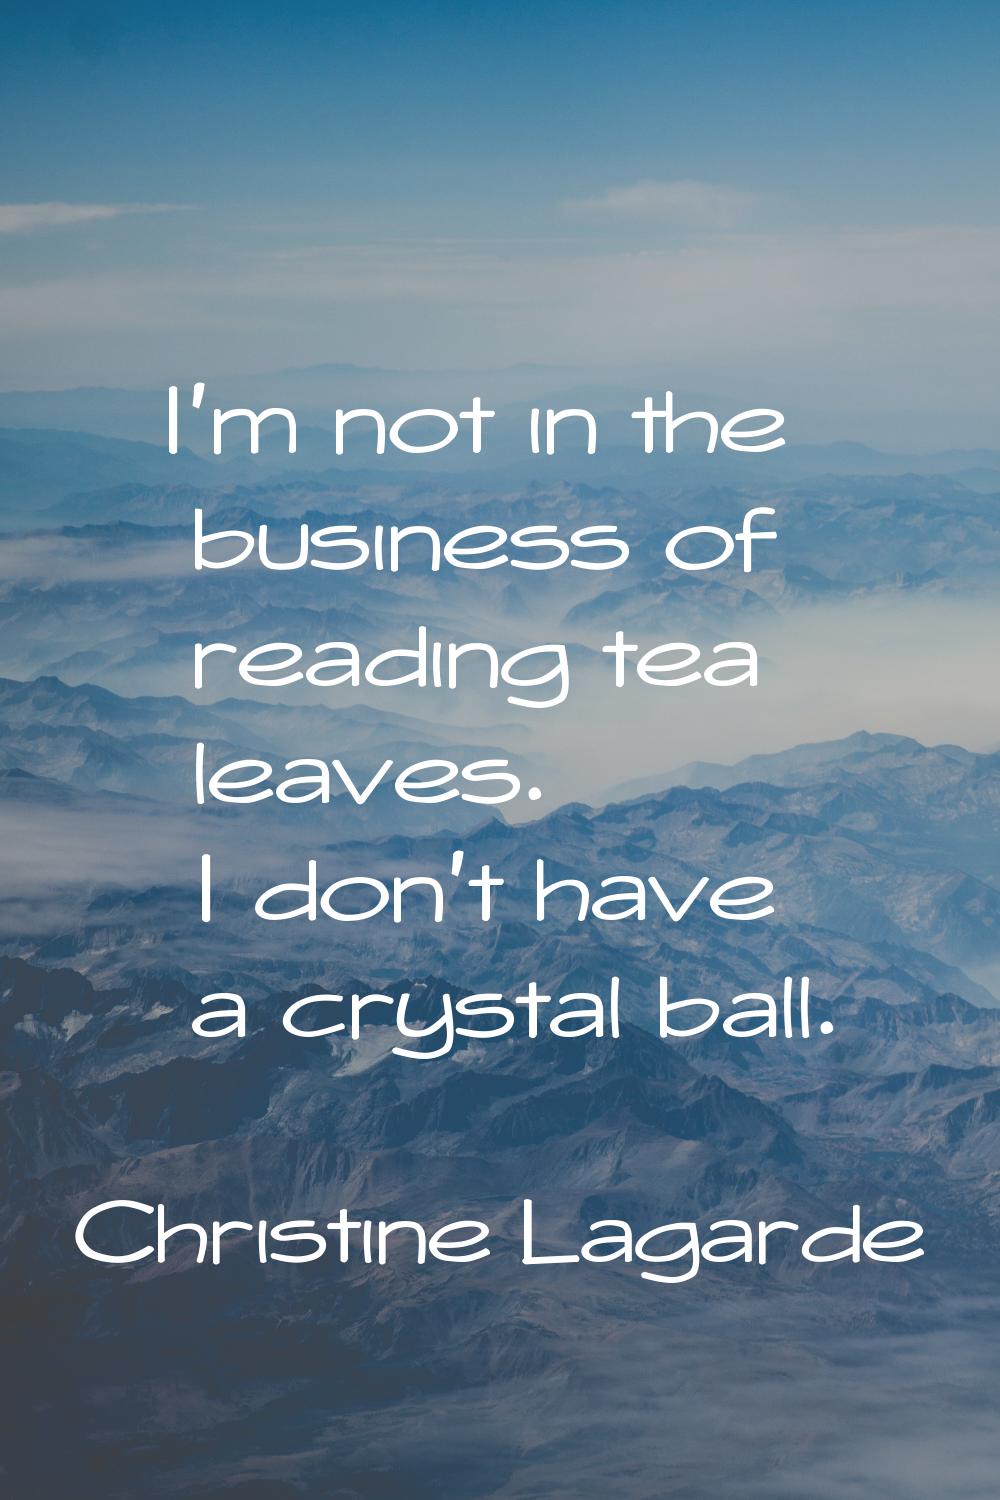 I'm not in the business of reading tea leaves. I don't have a crystal ball.